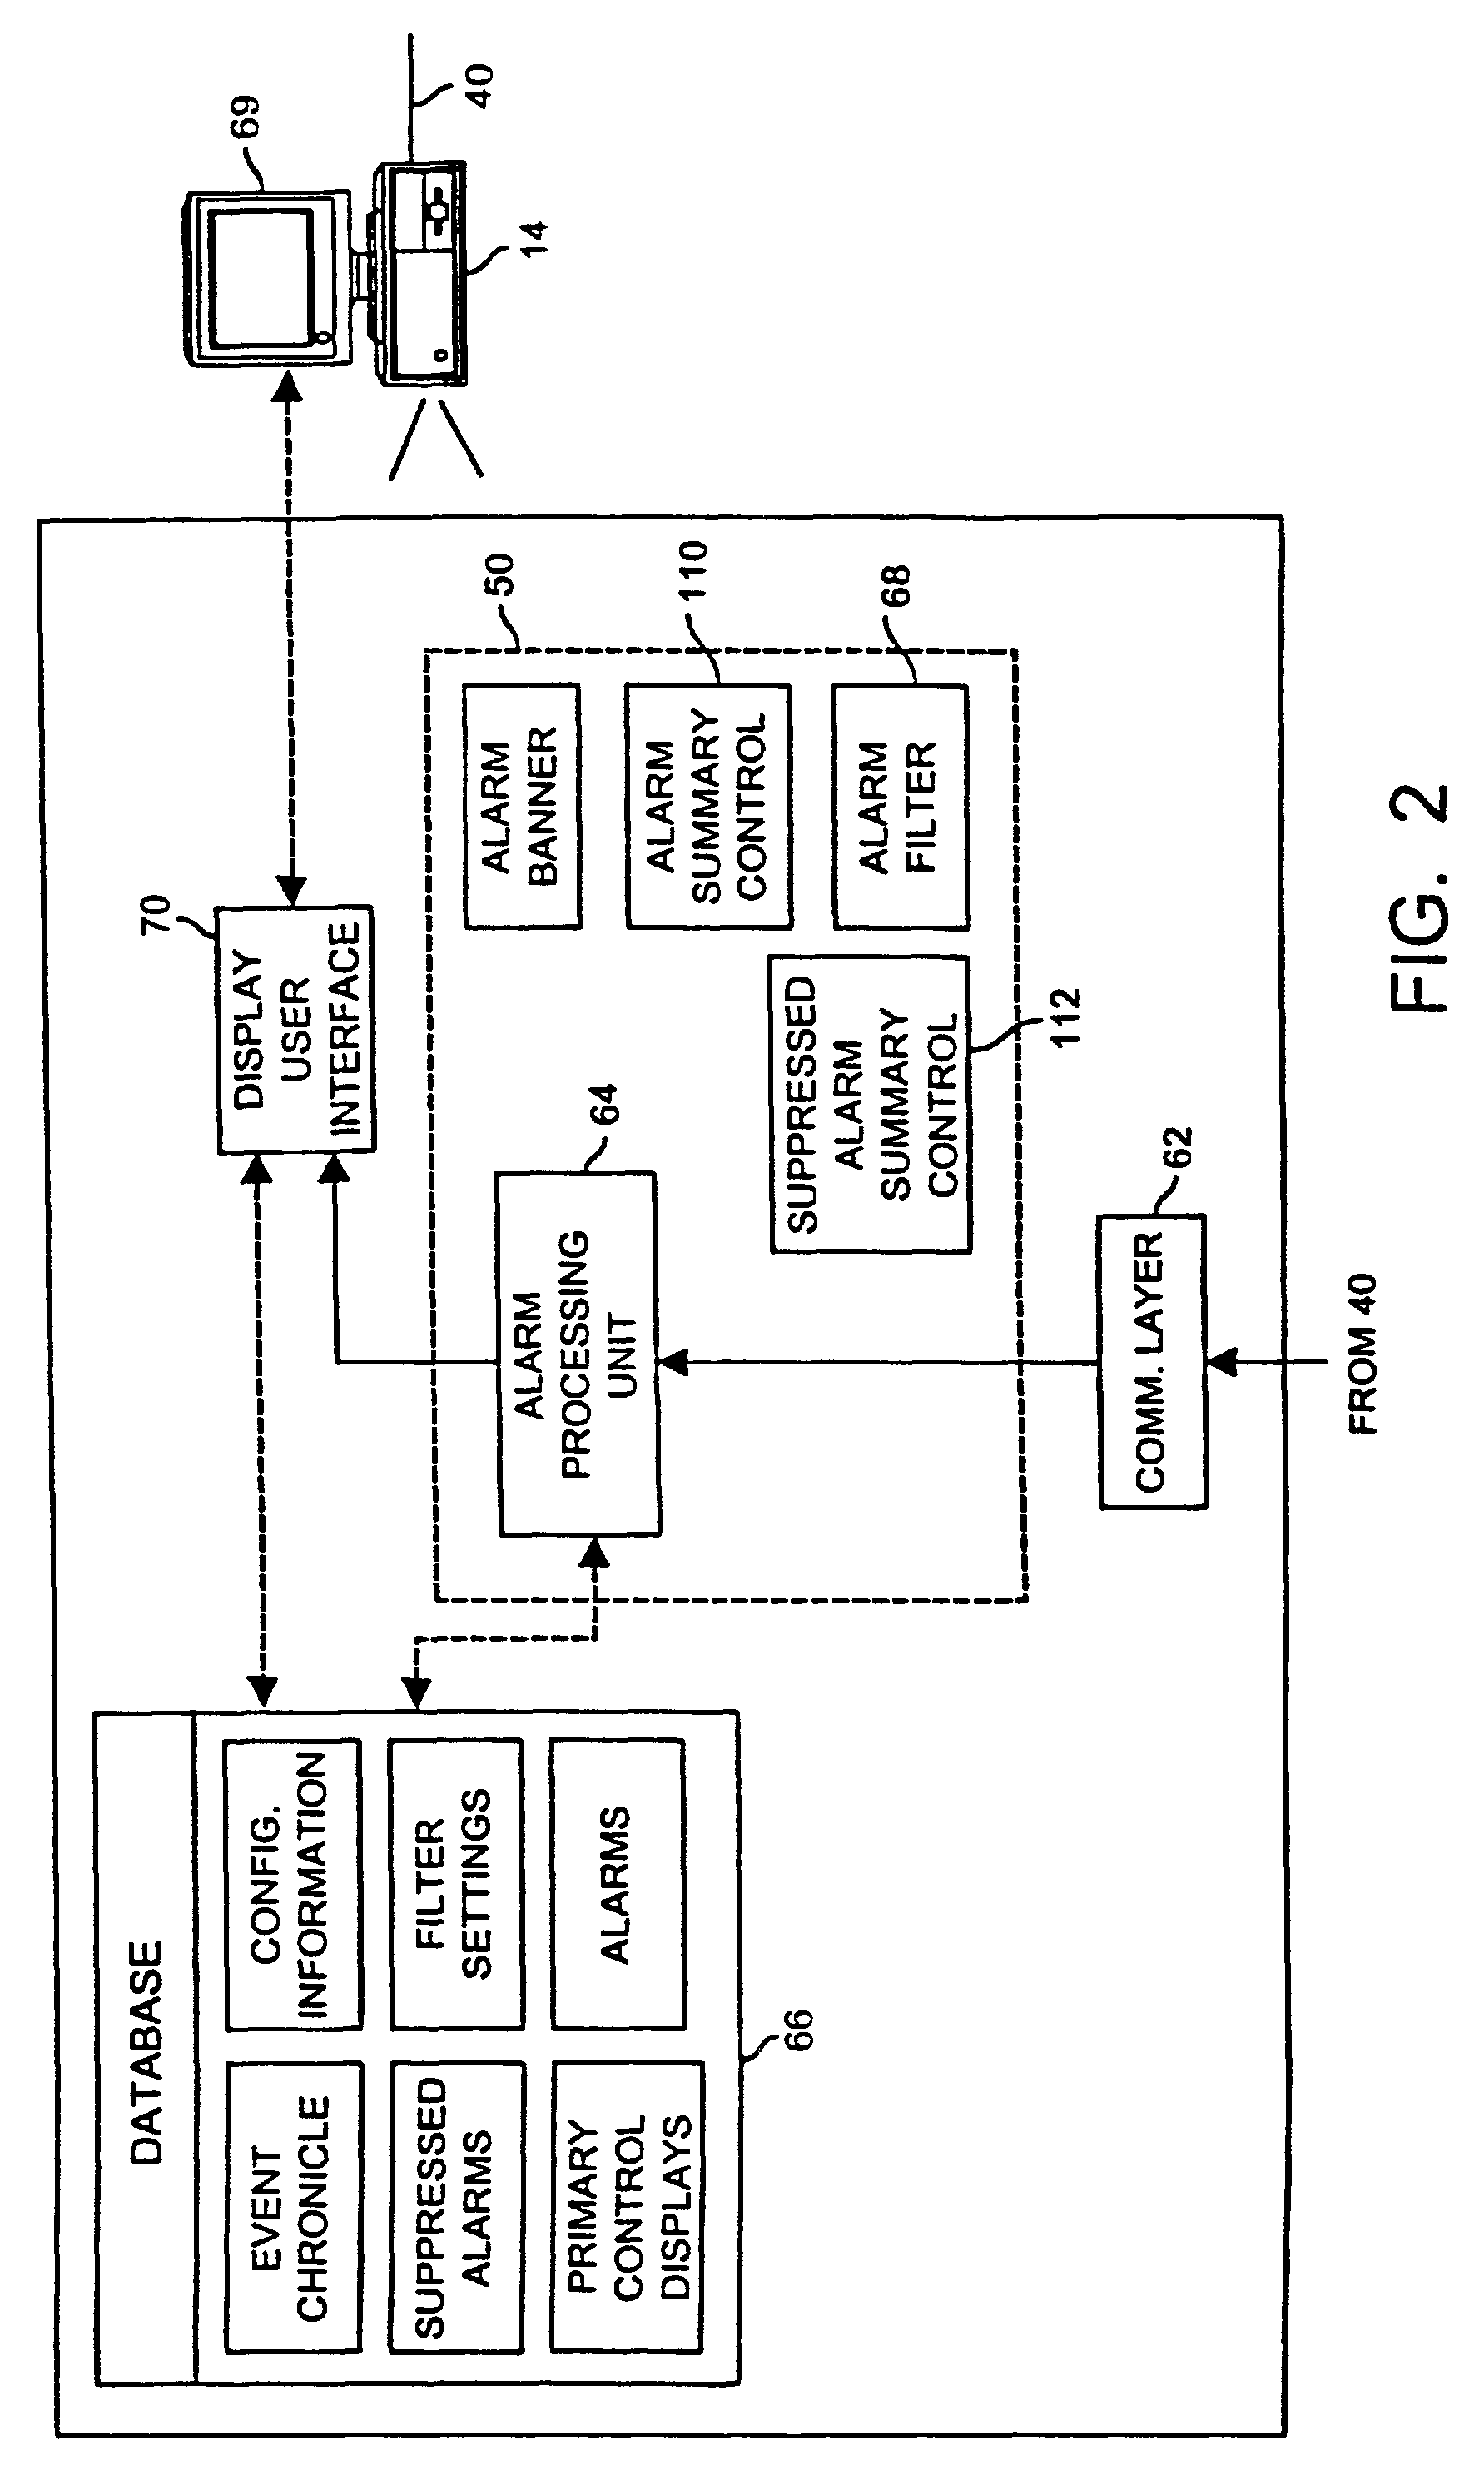 Integrated device alerts in a process control system